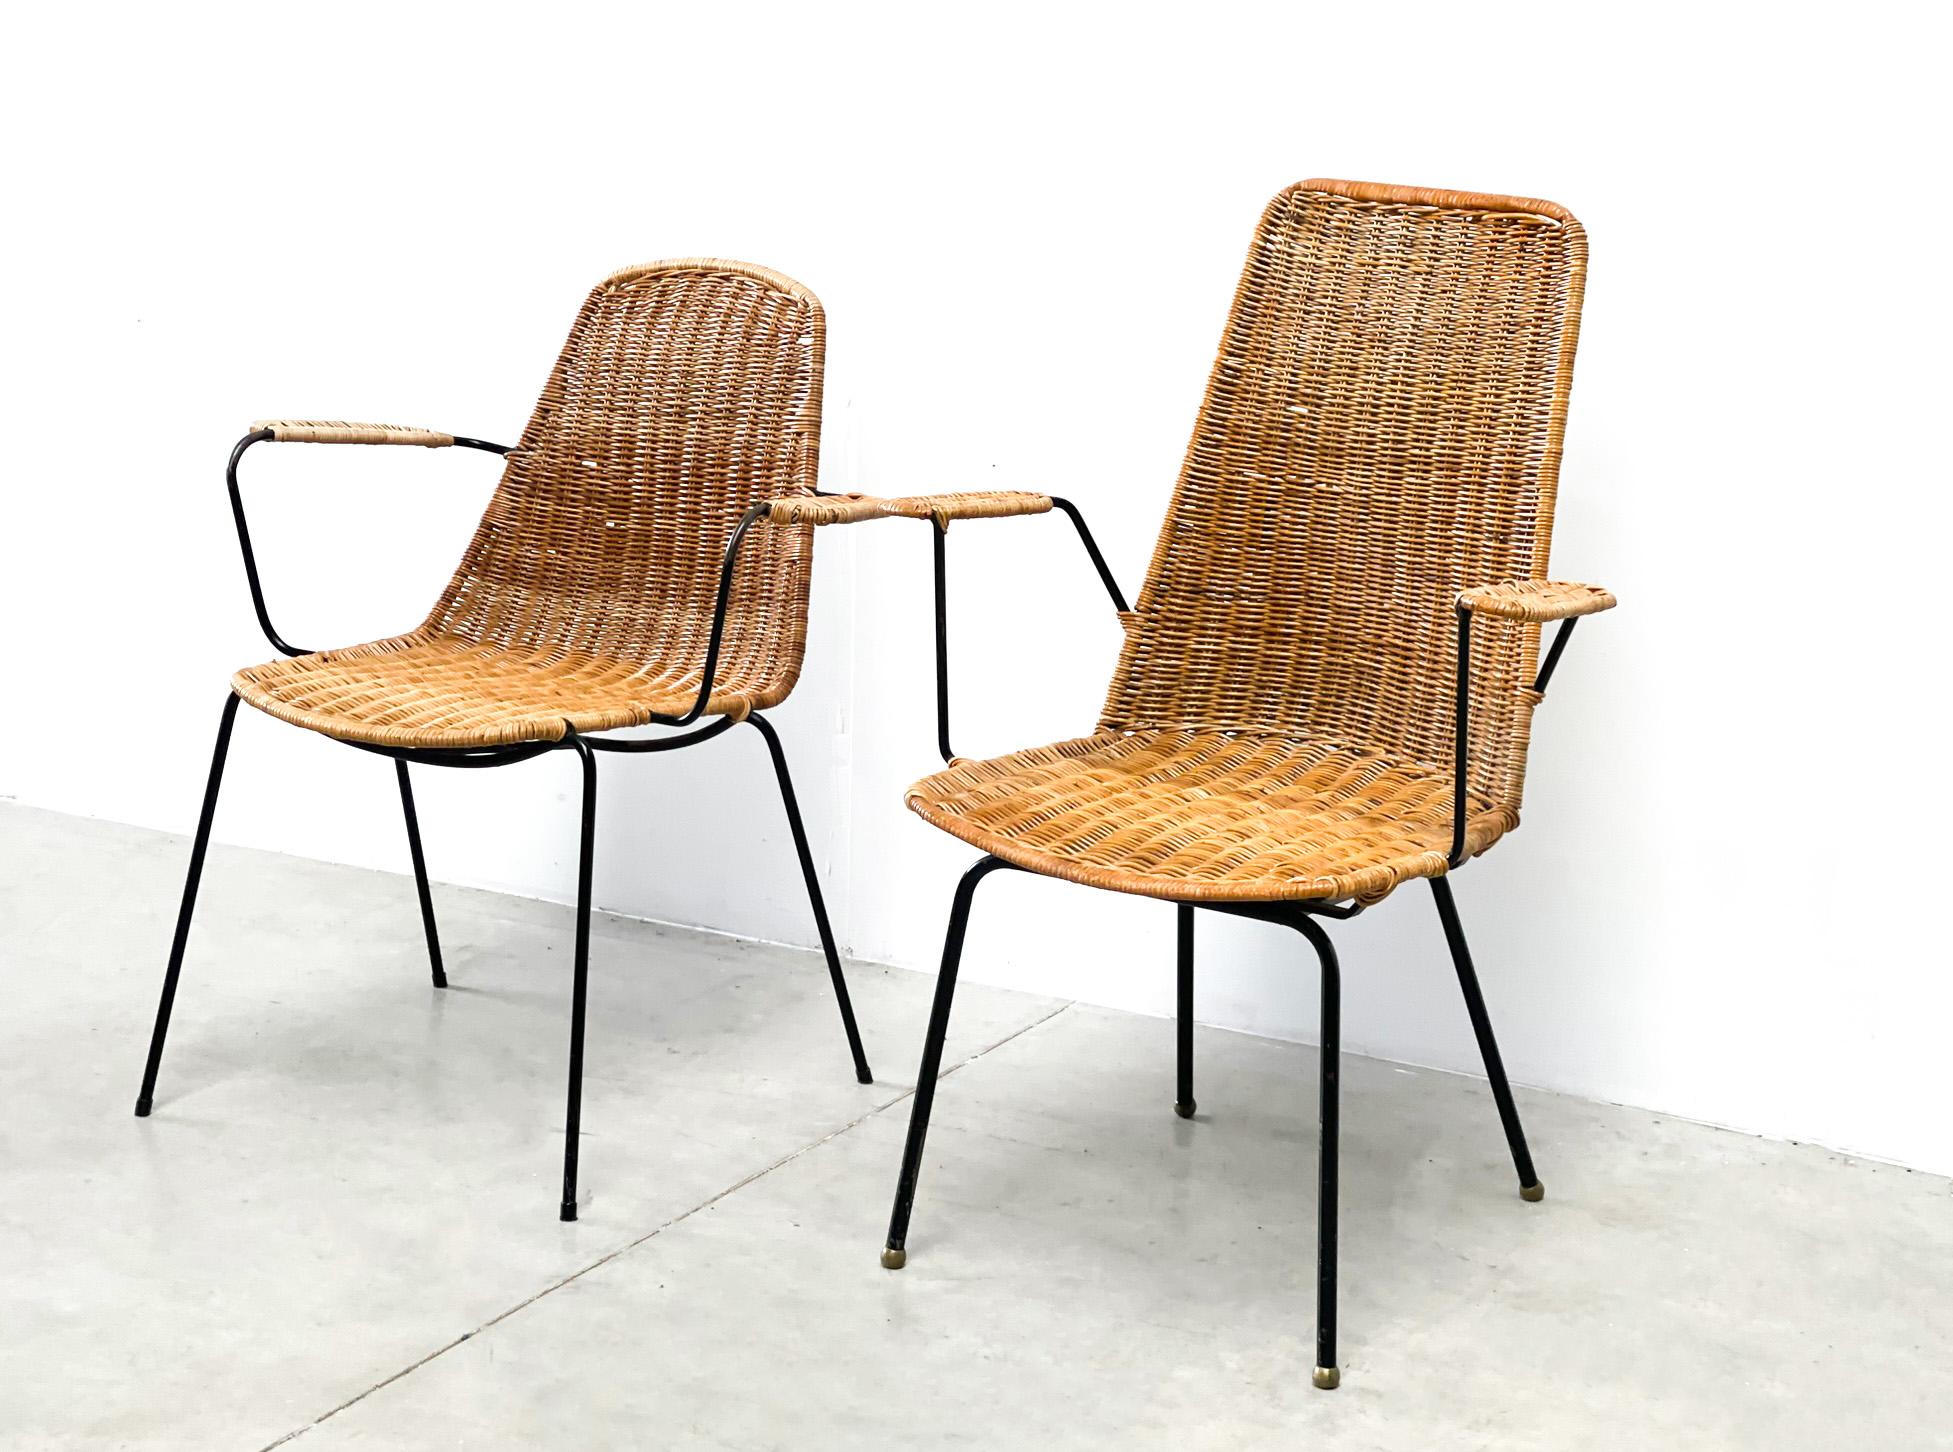 Set of 2 rattan chairs. The chairs were probably made in the 60s in france. They are very similar to rattan chairs by Italian designer Gian Franco Legler and Dutch designer Dirk Van Sliedregt. Only these are slightly different. They certainly have